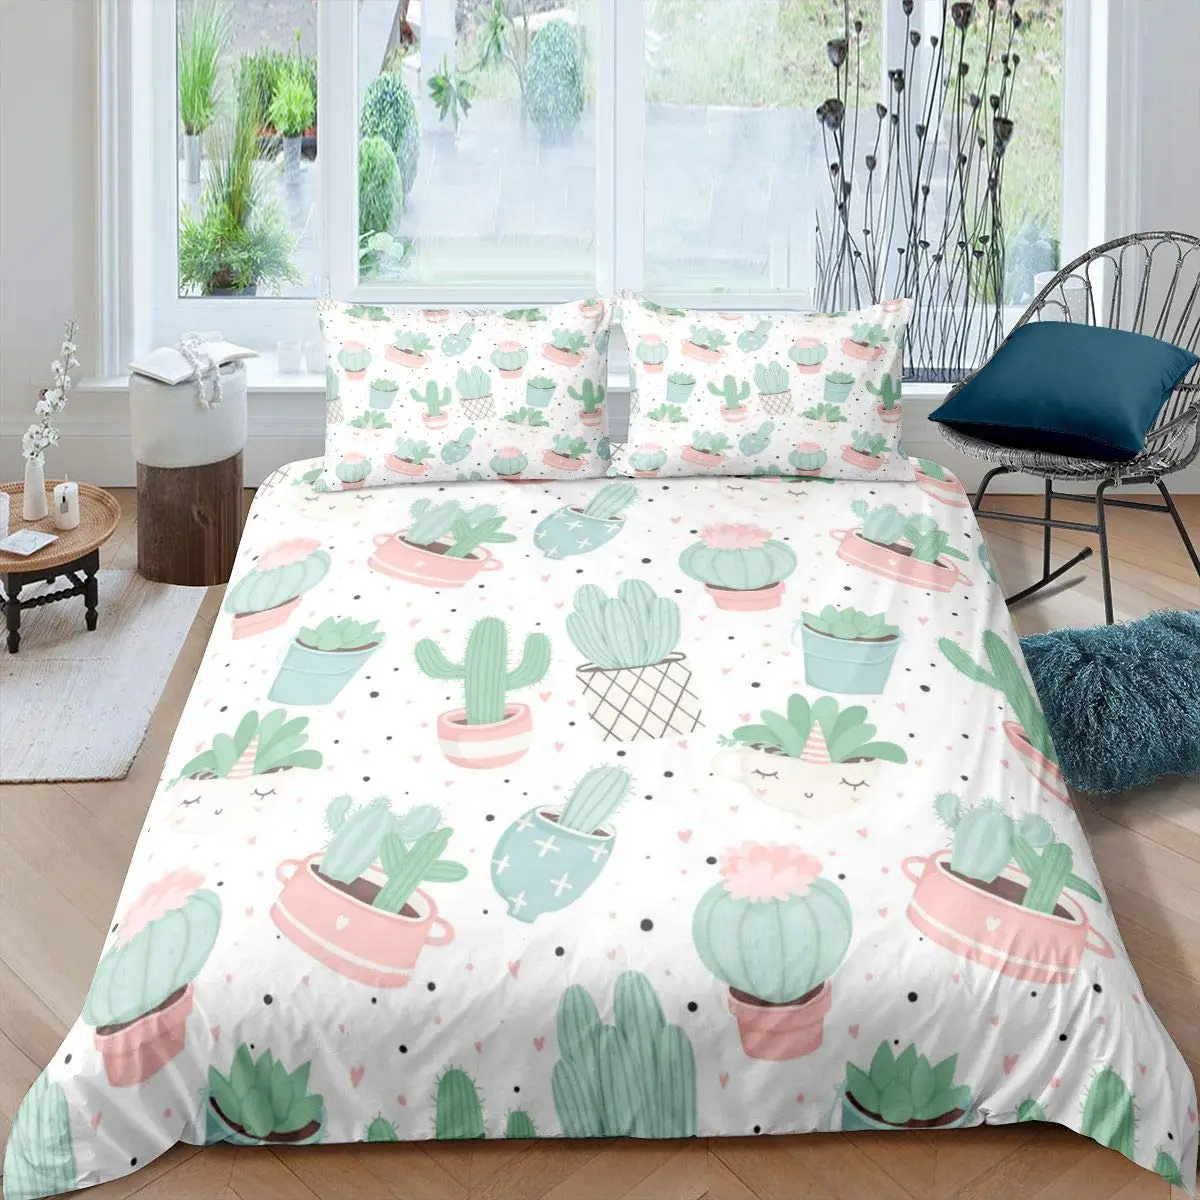 

Bedding Set Watercolor Painting Stylish Nature Theme Twin Quilt Cover Succulents Duvet Cover Set Green Plant Tropical Botanical